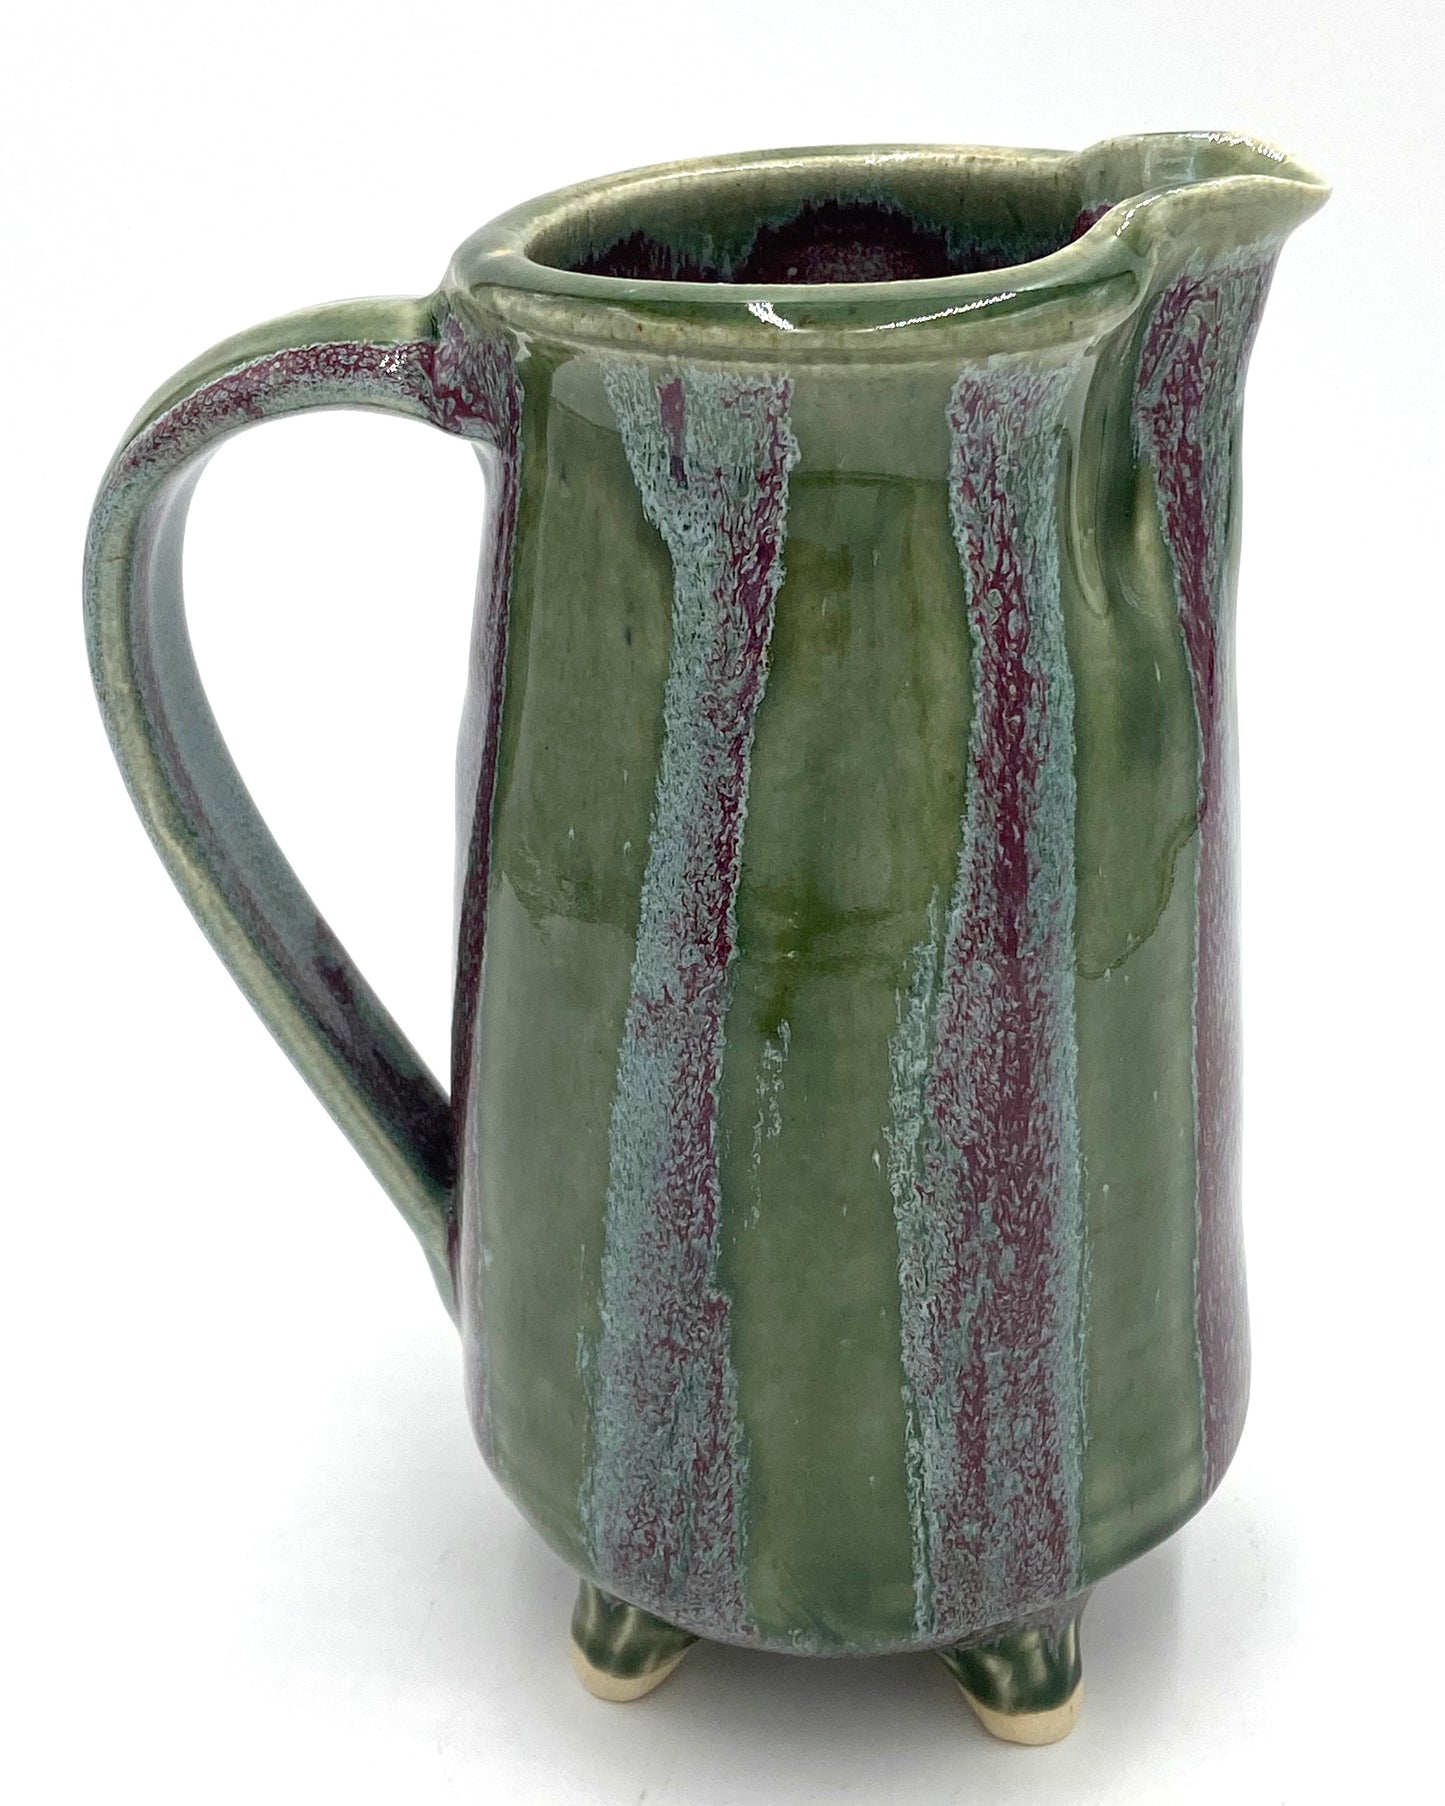 Green and Burgundy Striped Pitcher